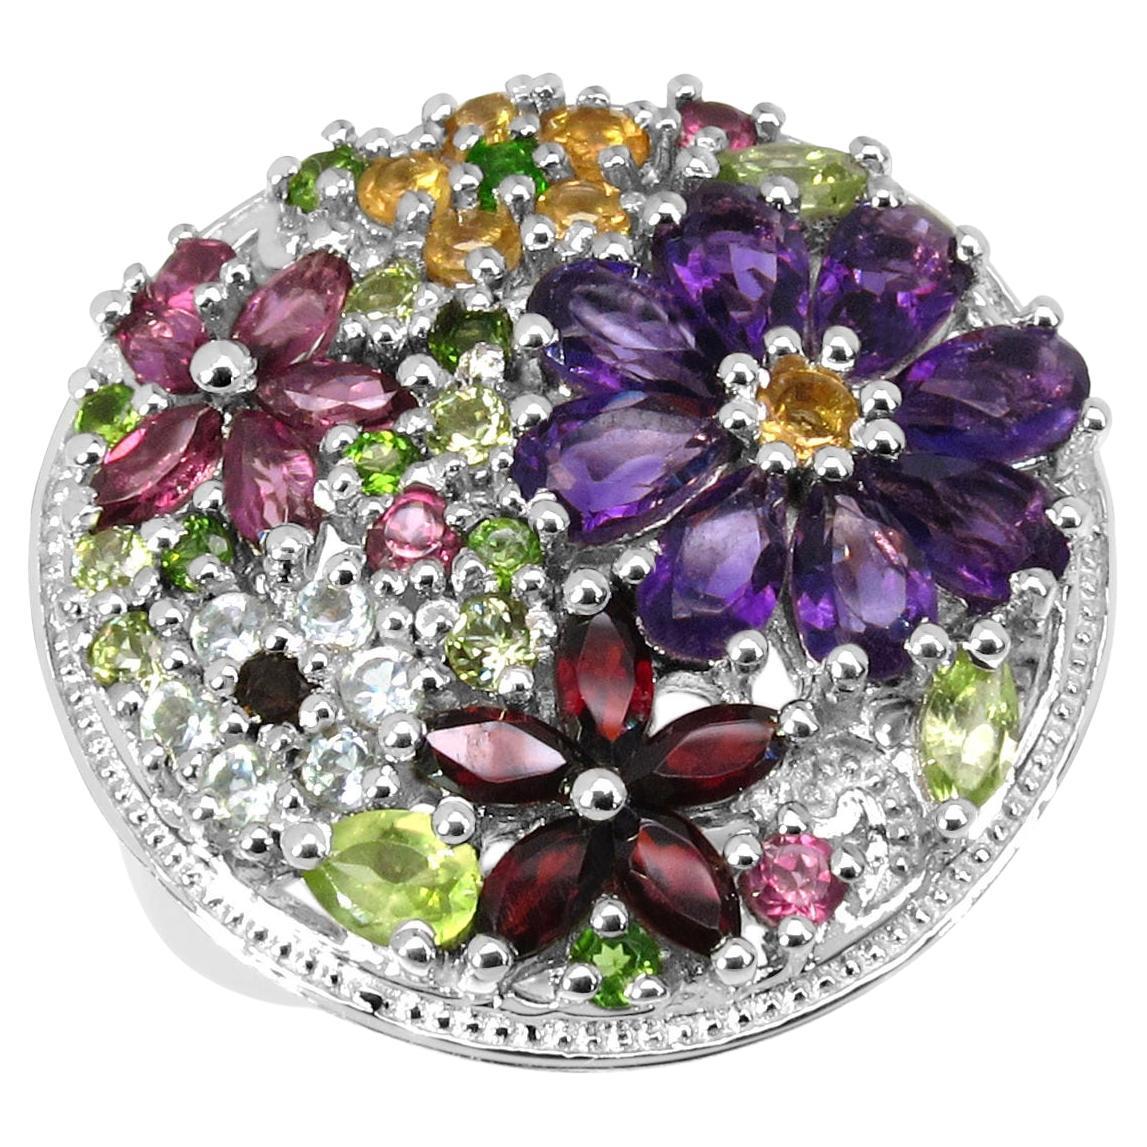 Natural Multi Colored Gemstones Flower Ring 4 Carats Total